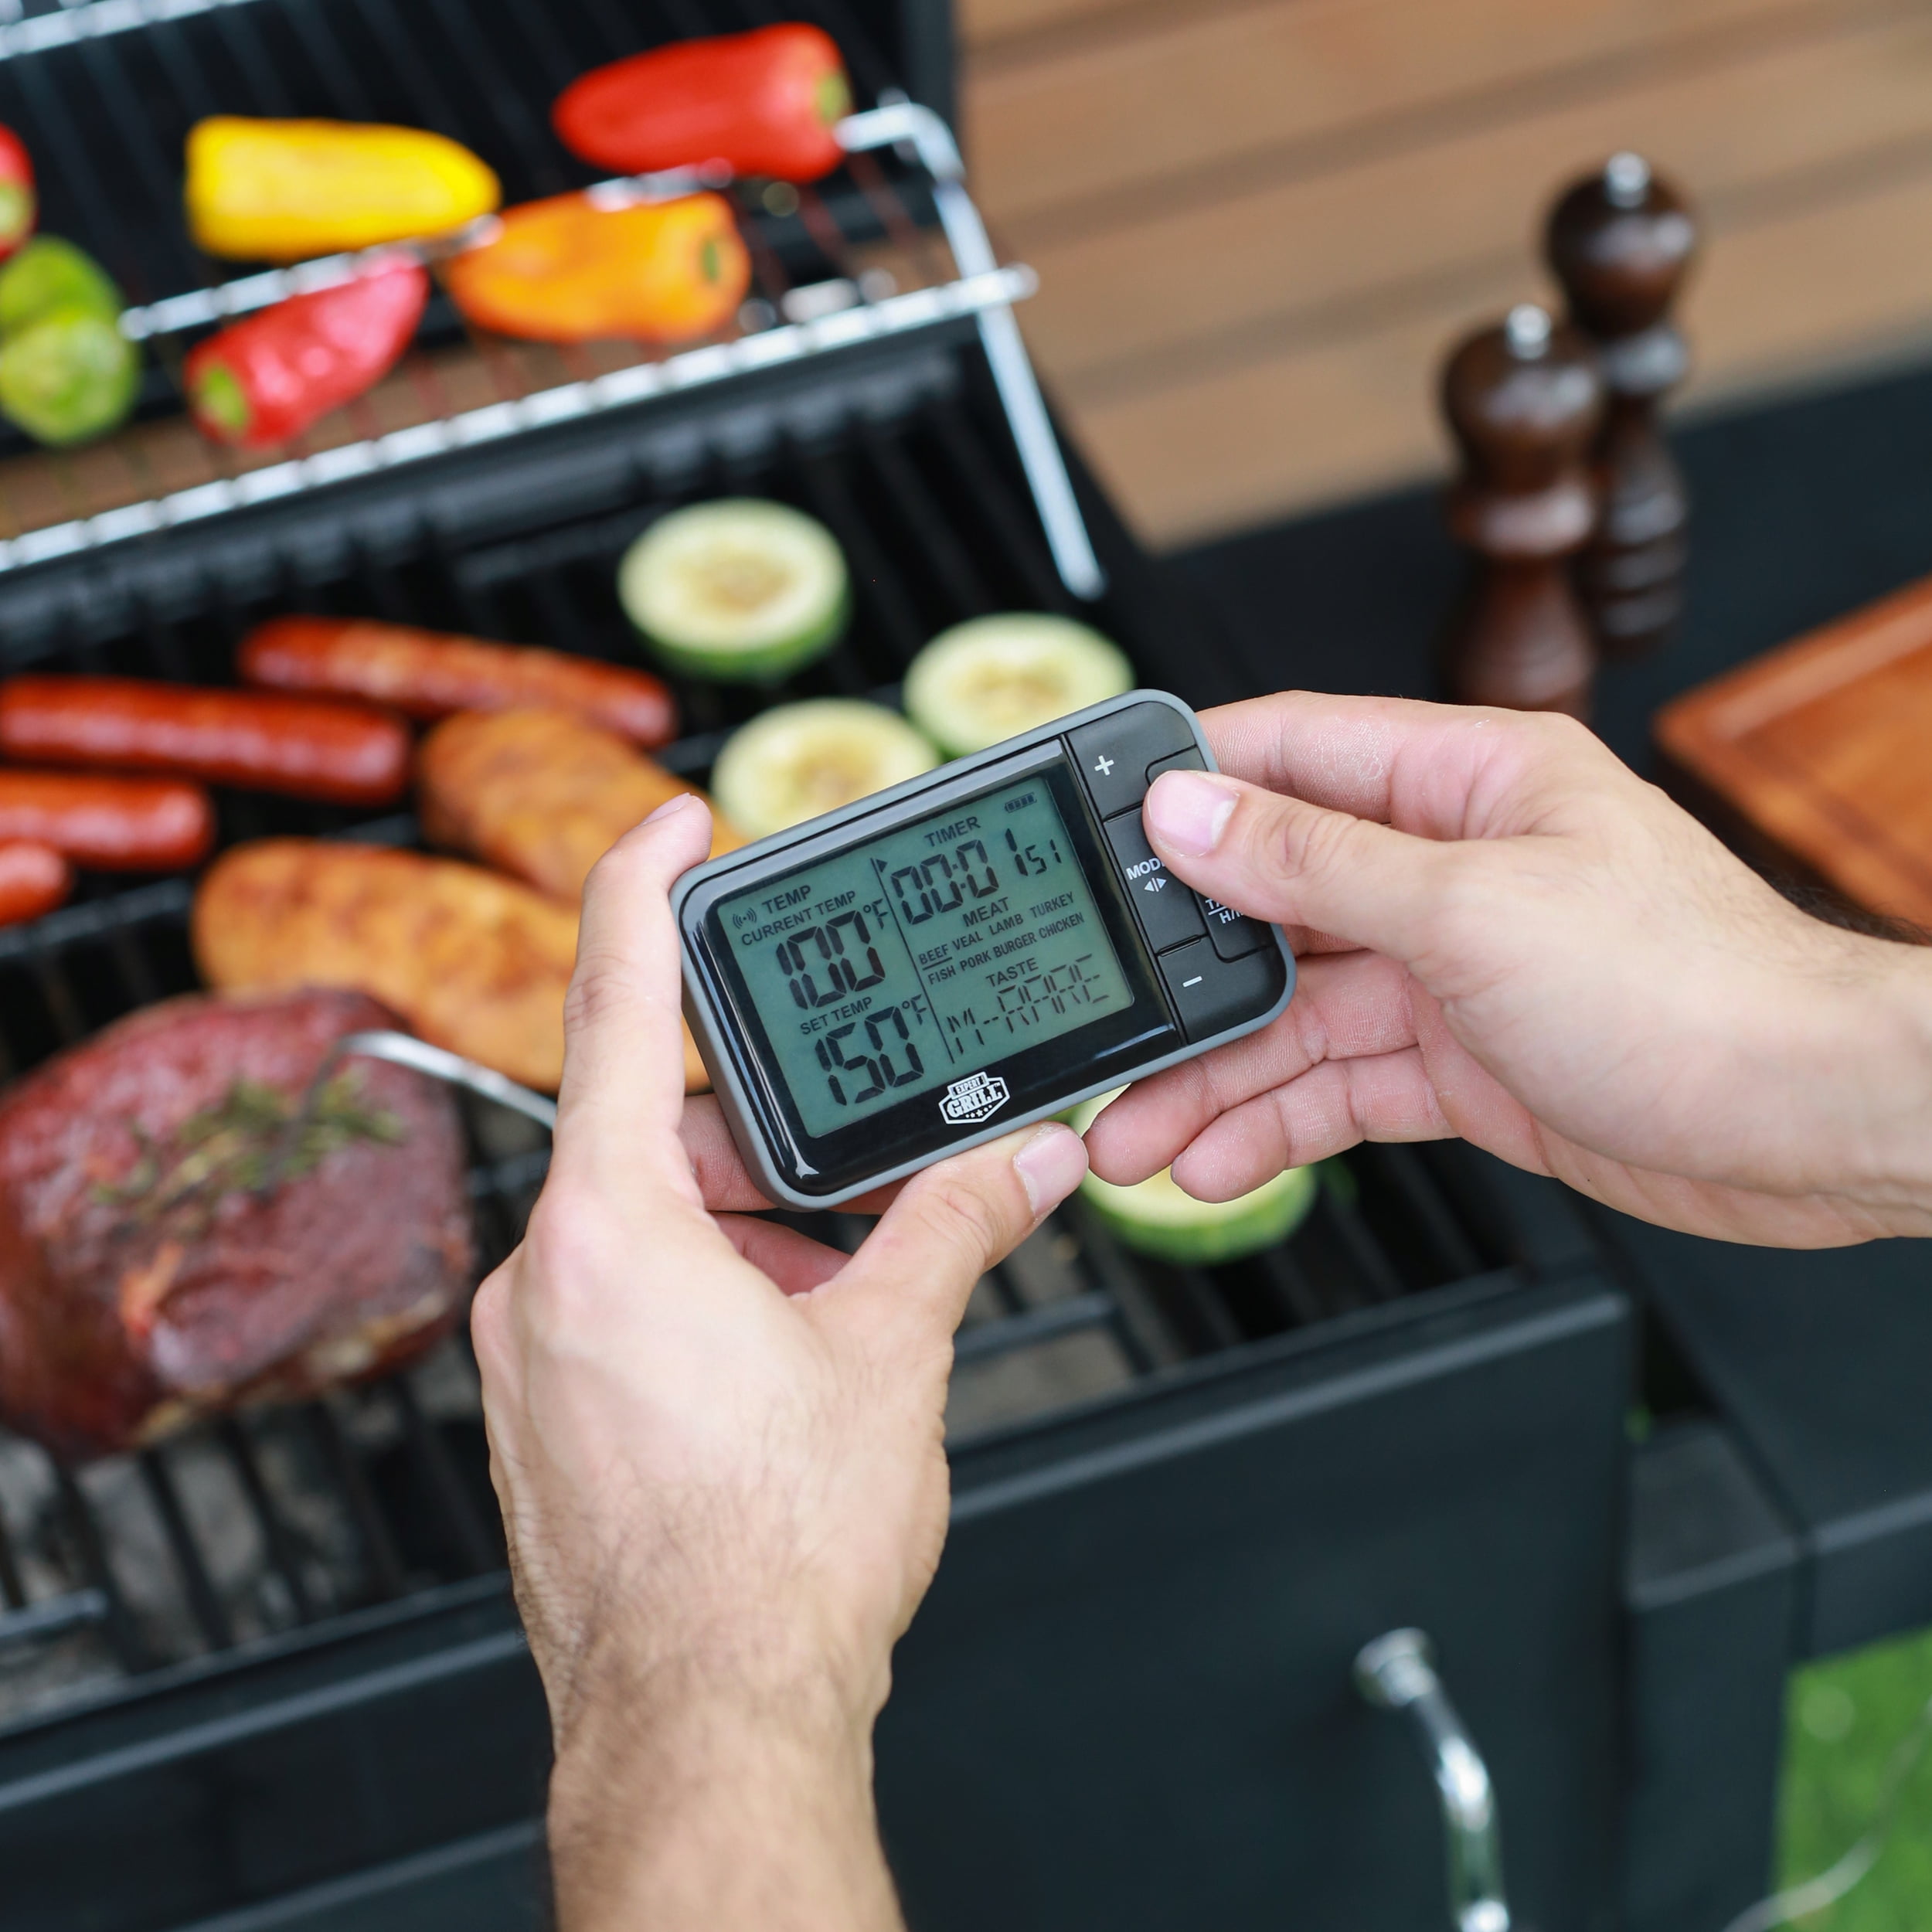 How to use this Expert Grill Wireless Grilling Thermometer [Plus